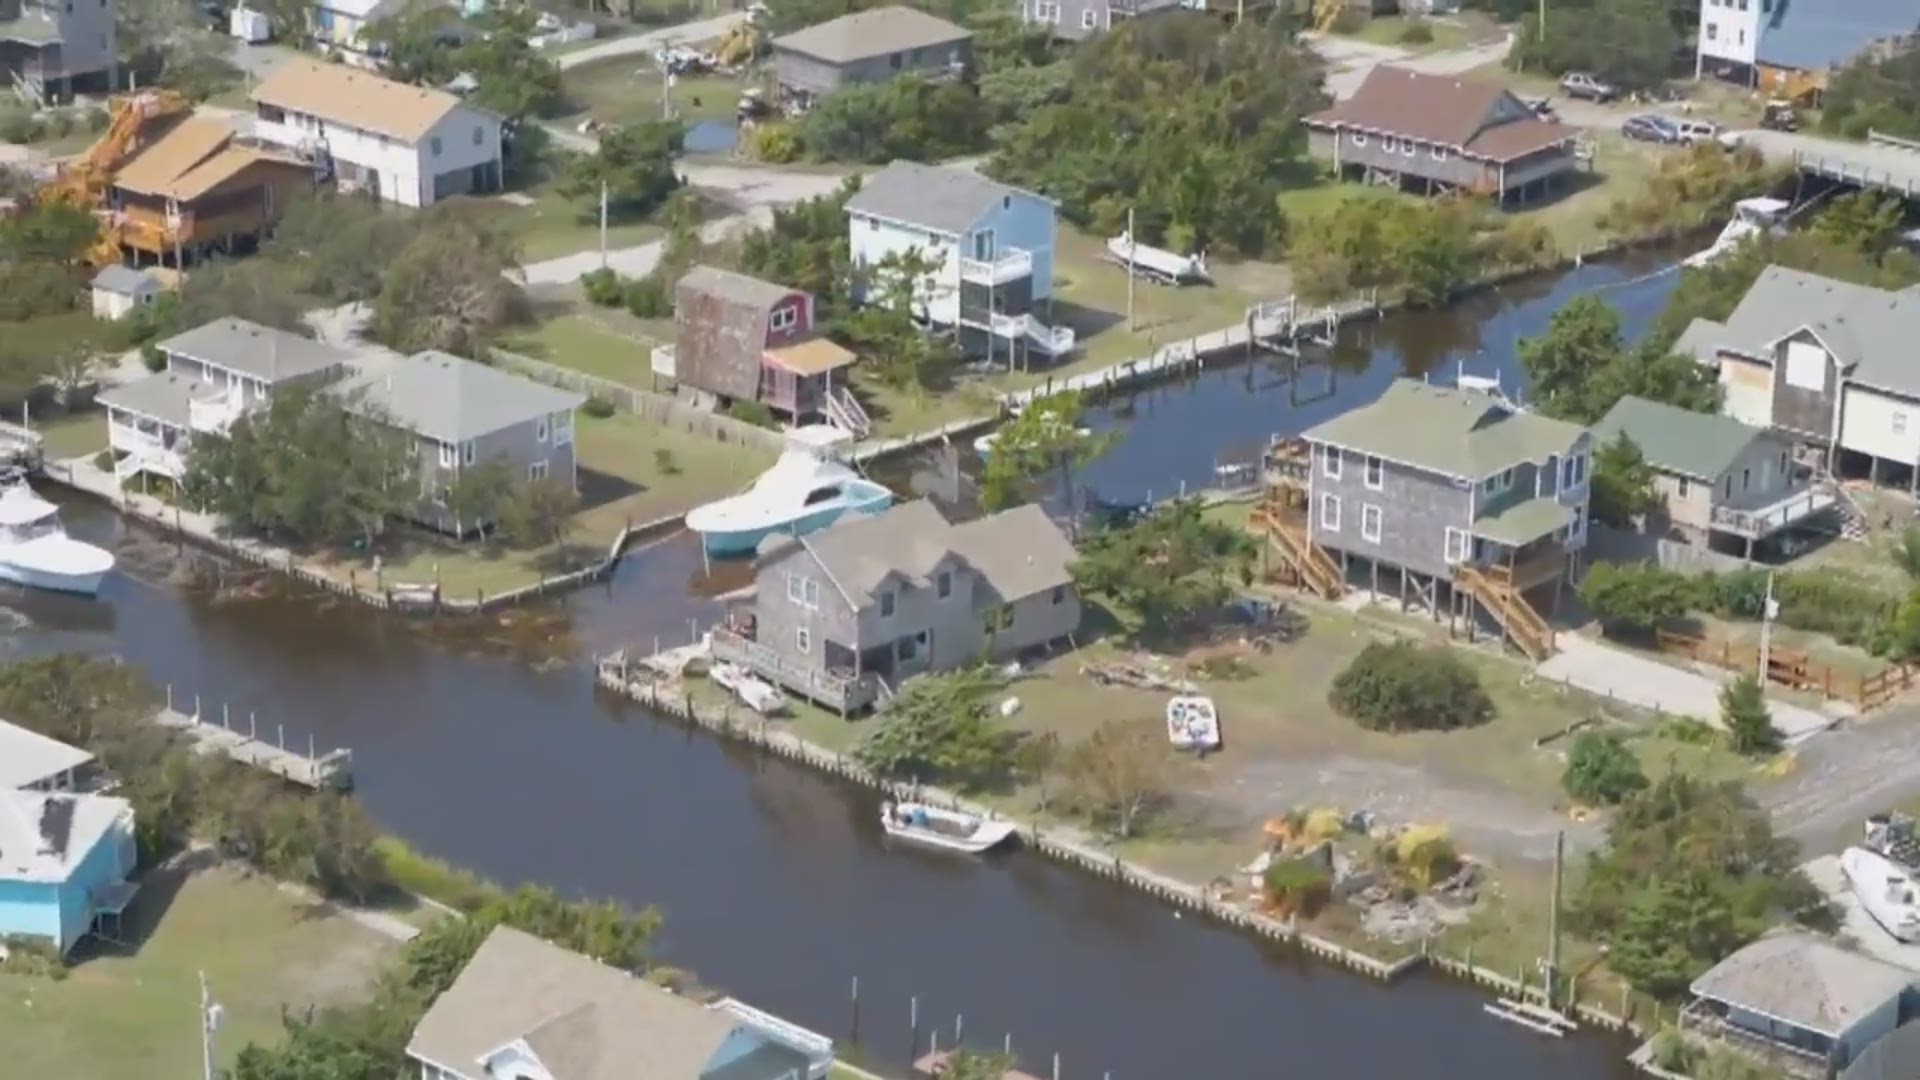 Dorian's storm surge and heavy rain triggered flooding in communities still recovering from the devastation left by Hurricane Florence last year.